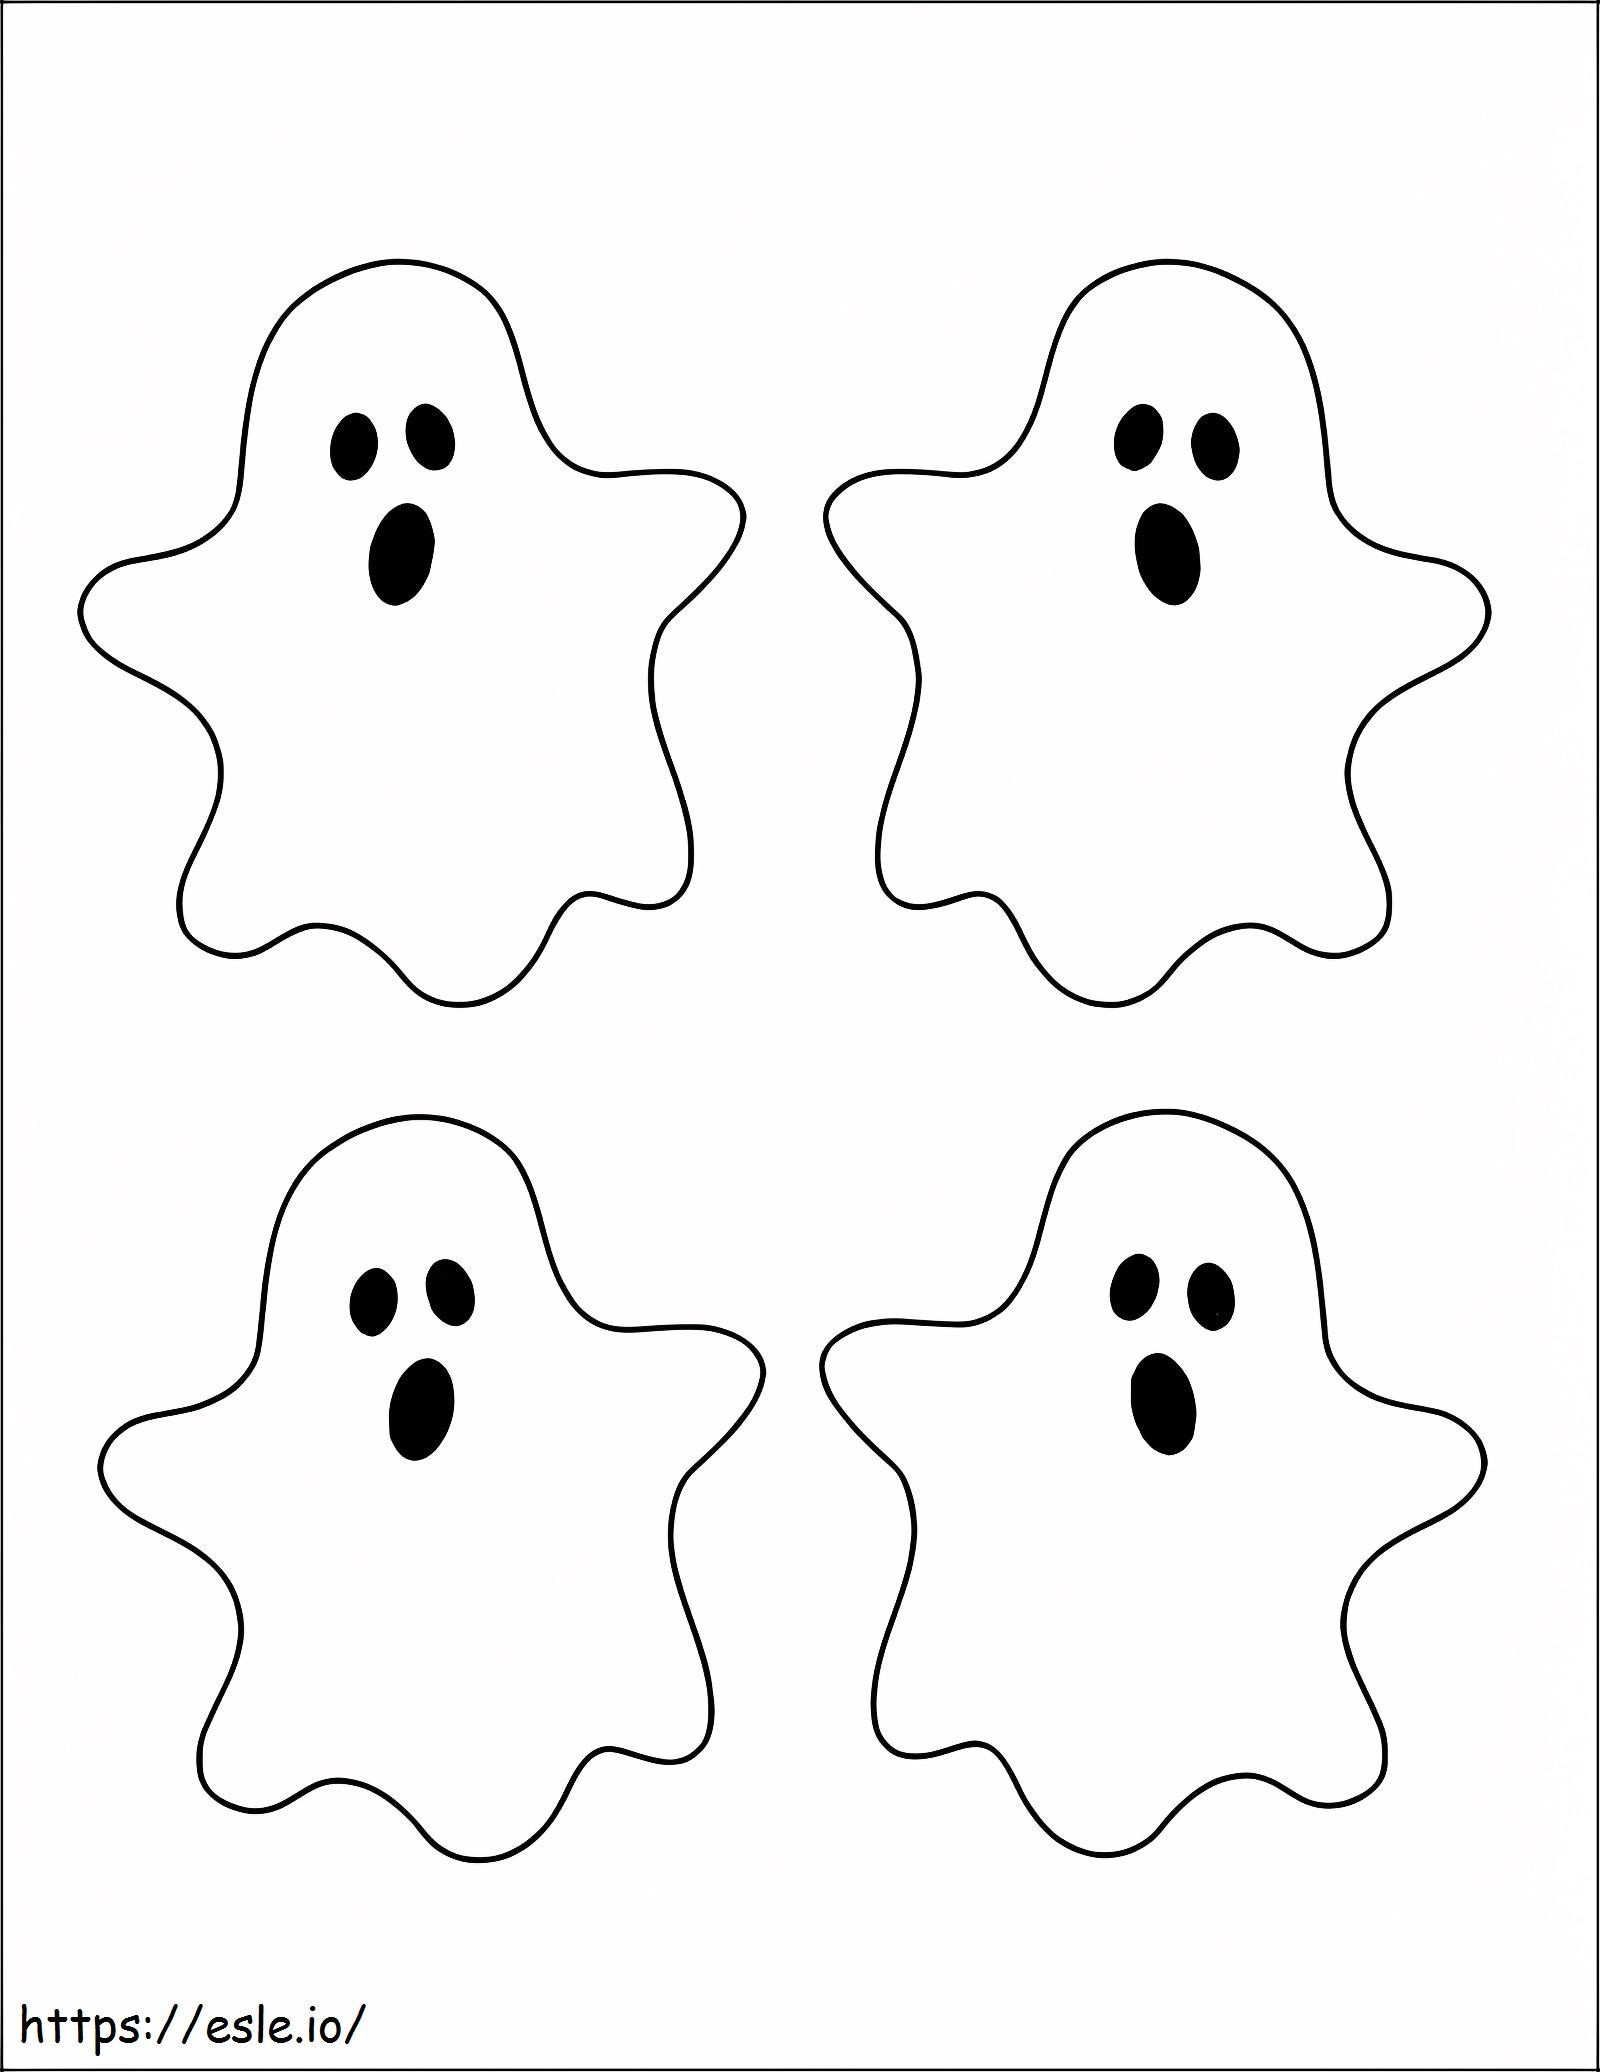 Four Ghosts coloring page